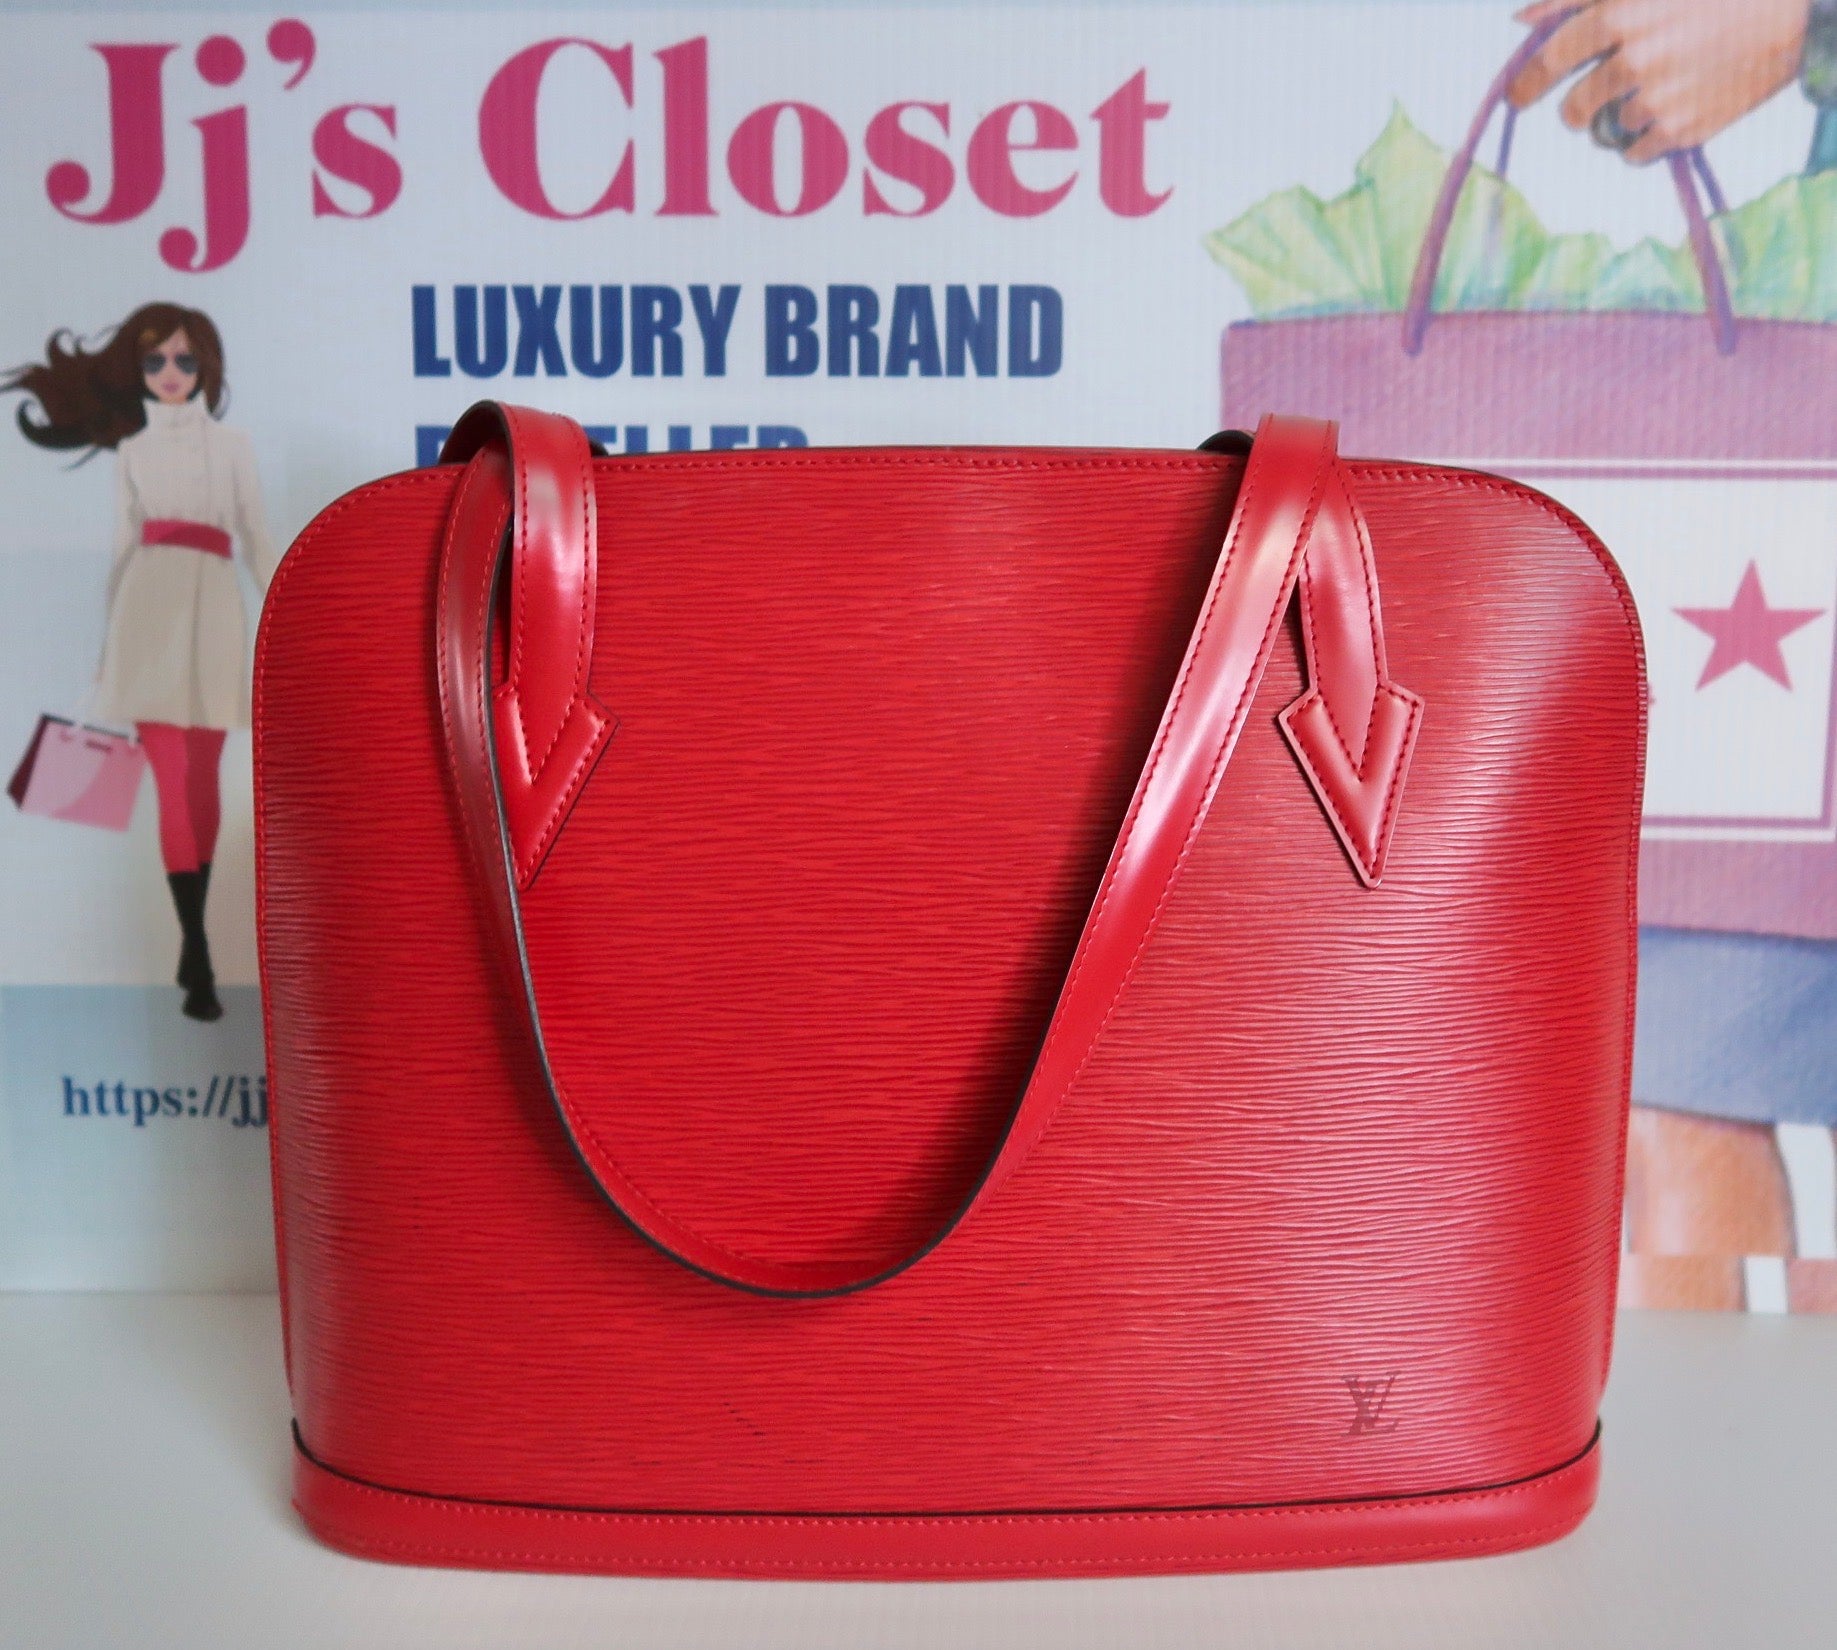 LOUIS VUITTON Lussac bag in red epi leather - Red suede …